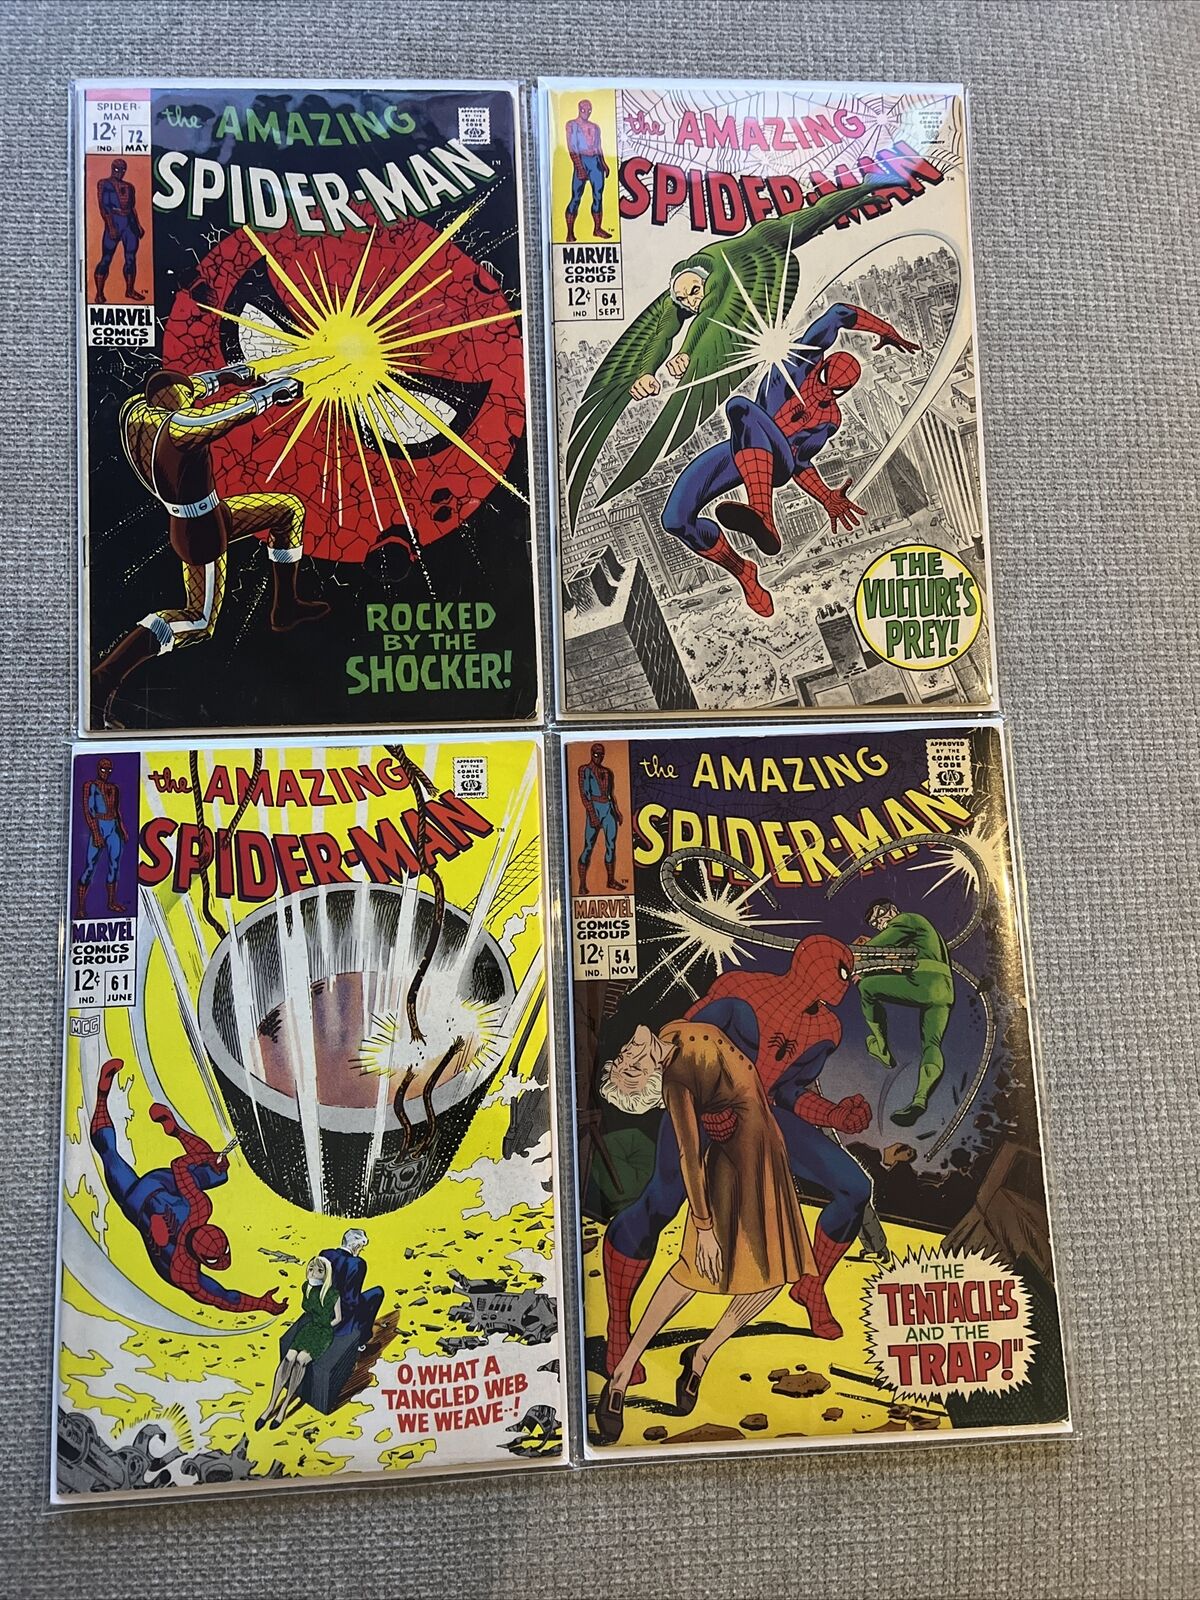 Amazing Spider-Man #’s 54 61 64 72 Lot (Classic Covers) Nice 12 Cent Silver Age